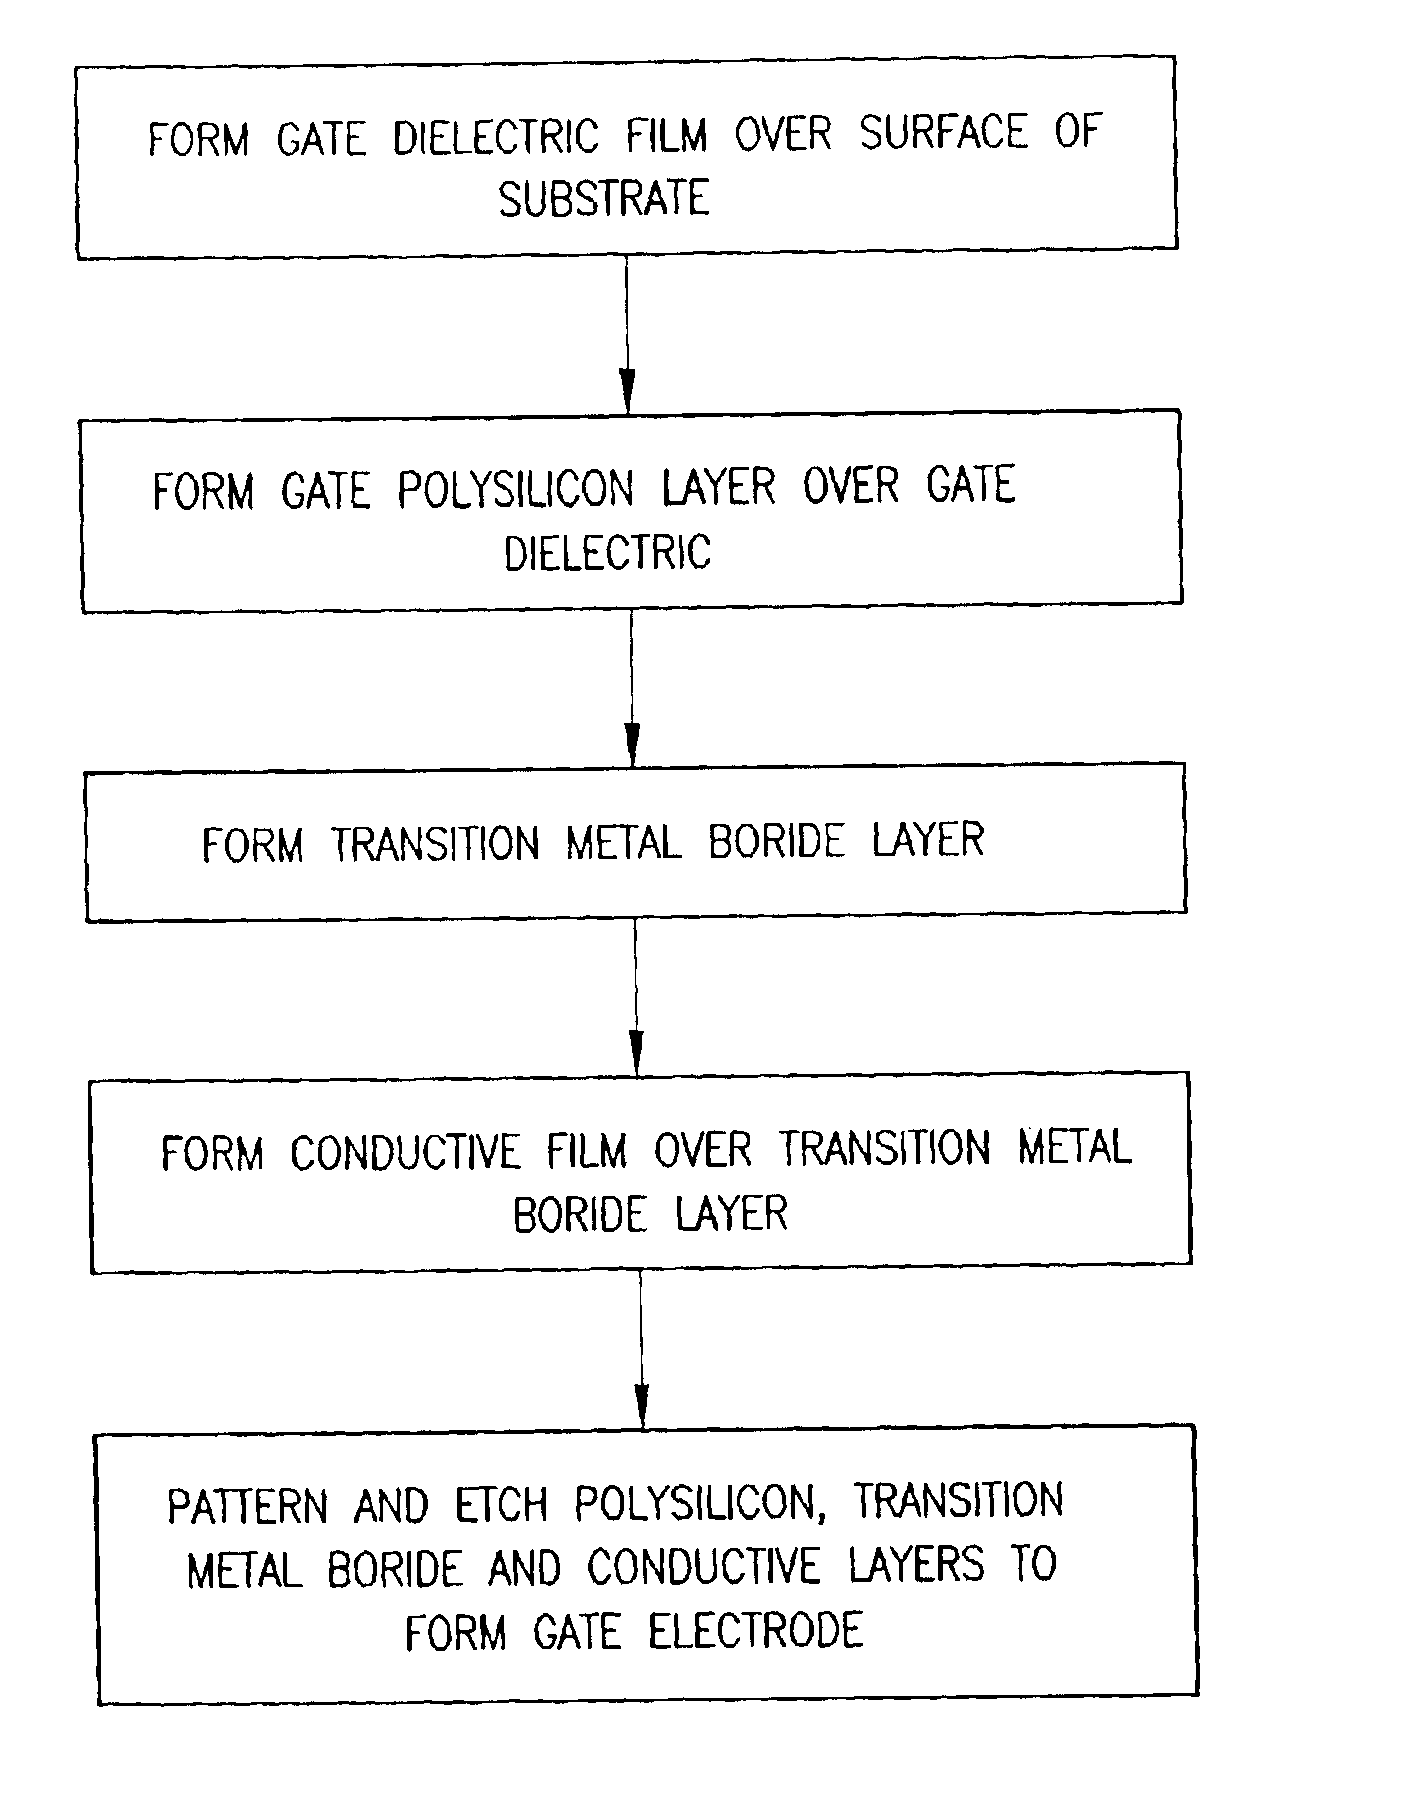 Fabrication of semiconductor devices with transition metal boride films as diffusion barriers